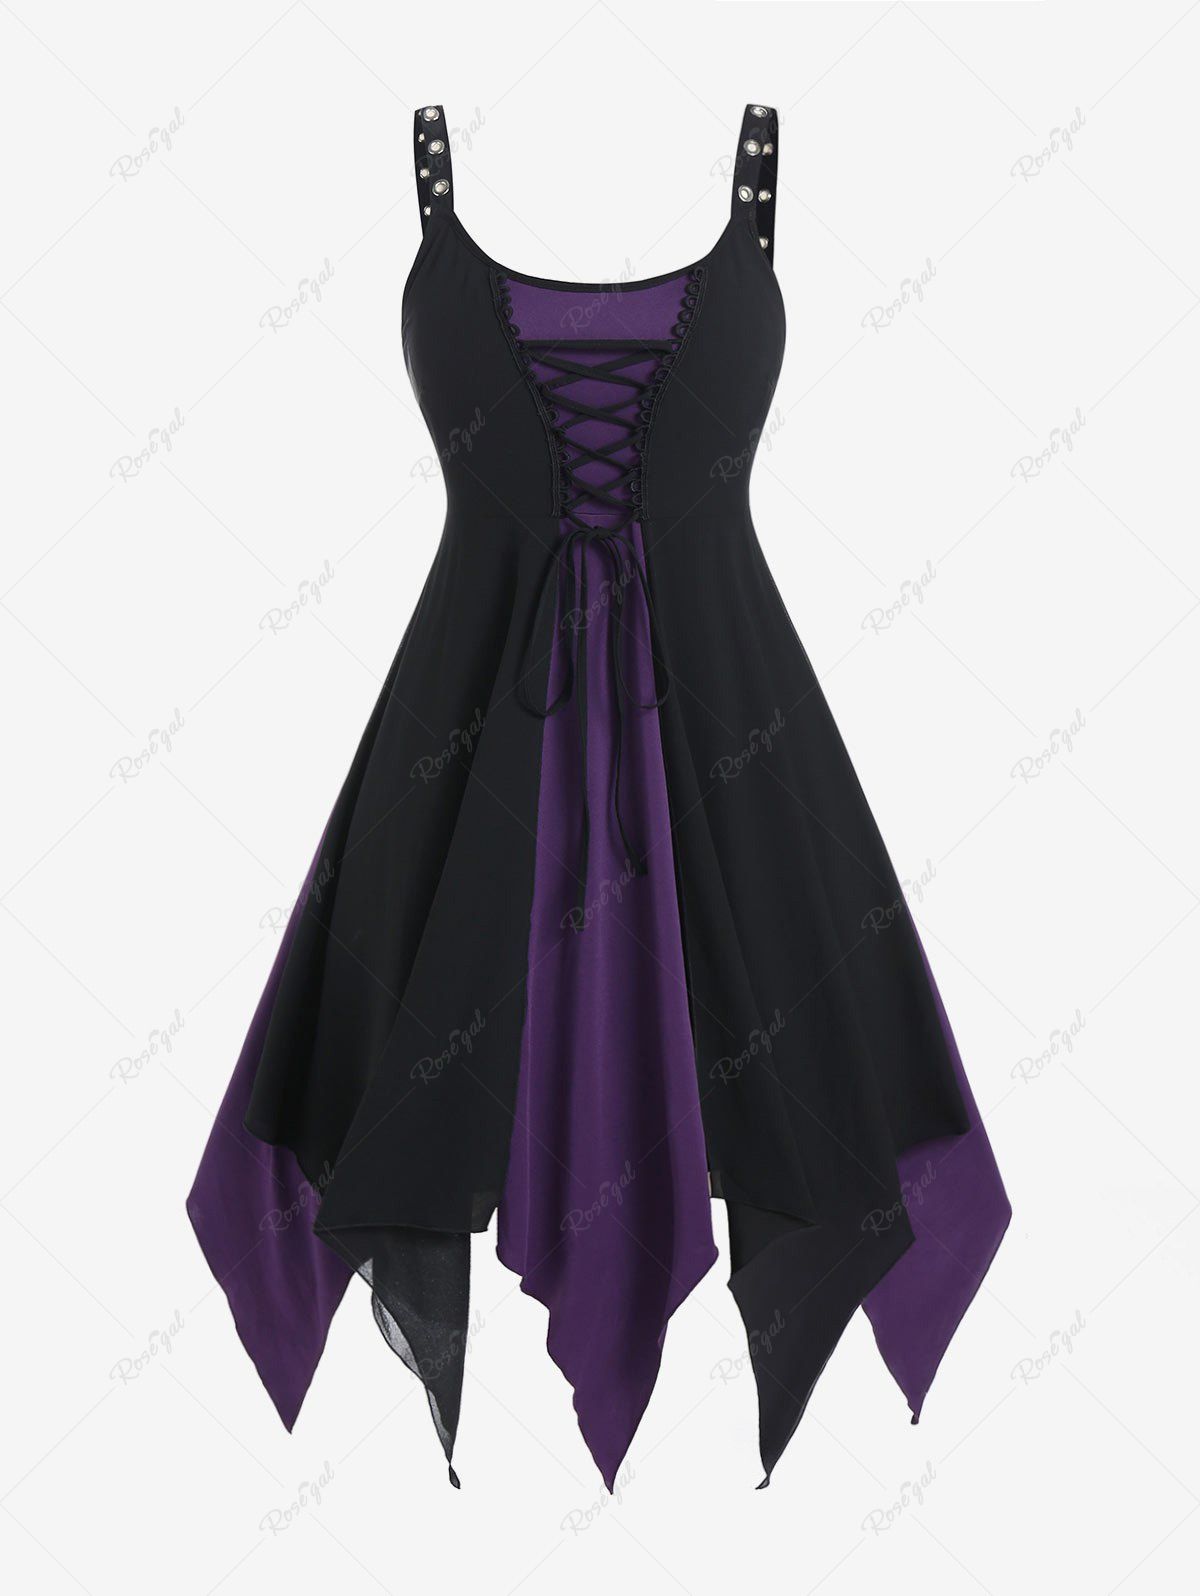 Chic Plus Size Gothic Lace Up Grommet Backless Sleeveless Handkerchief Midi Dress  